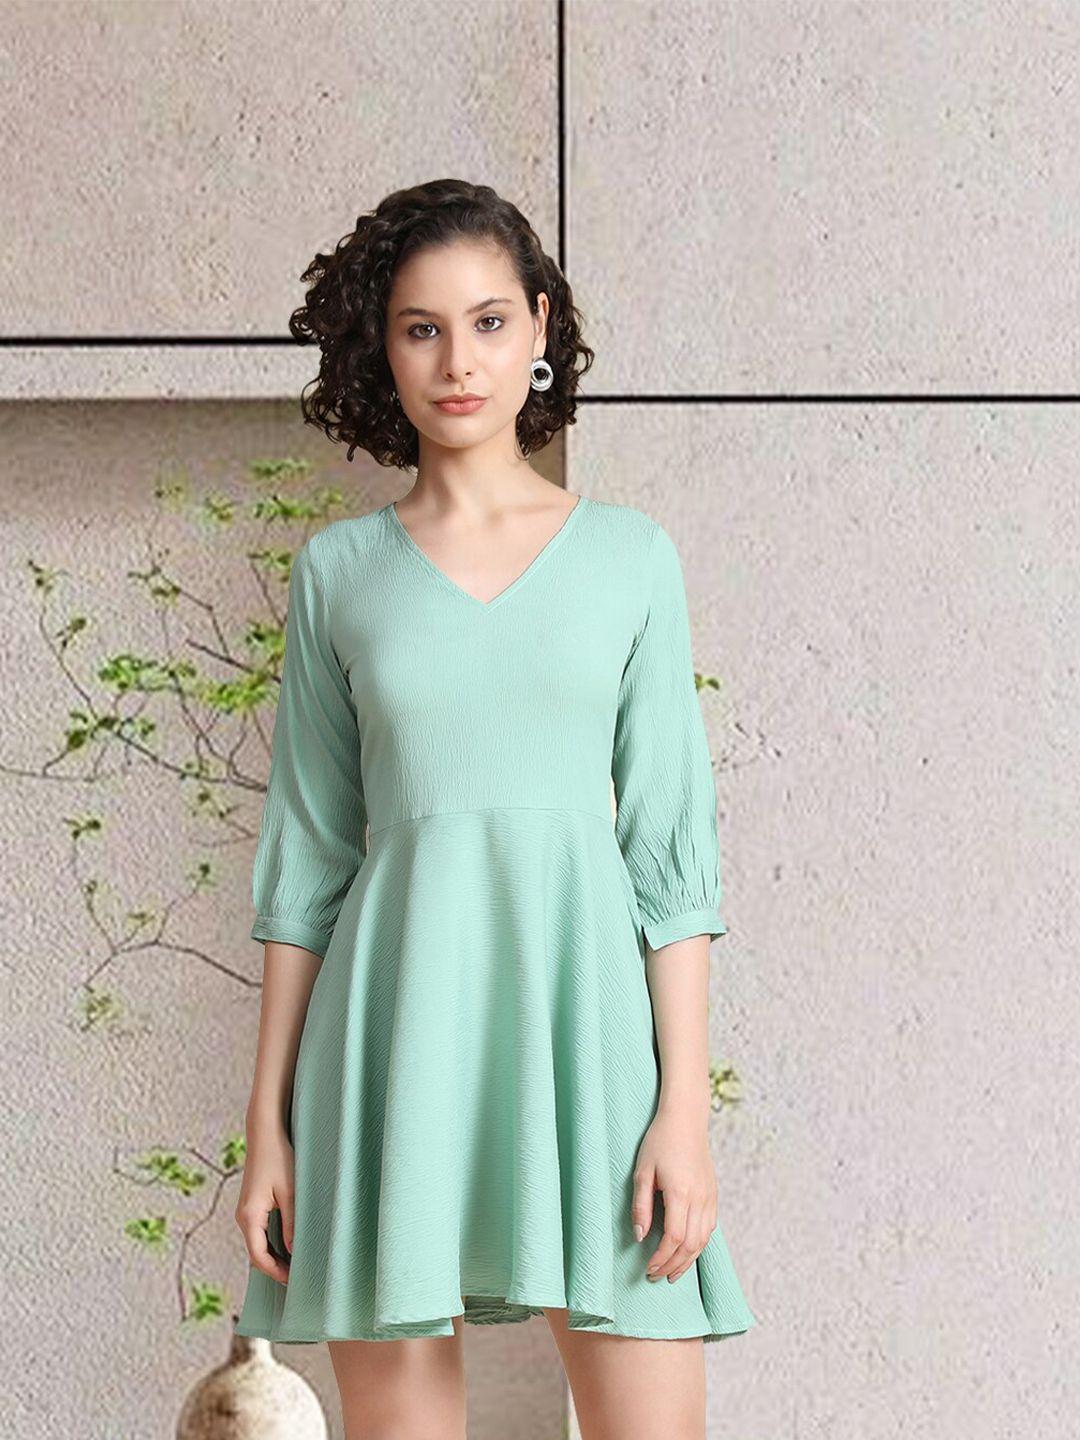 baesd v-neck puff sleeves a-line dress